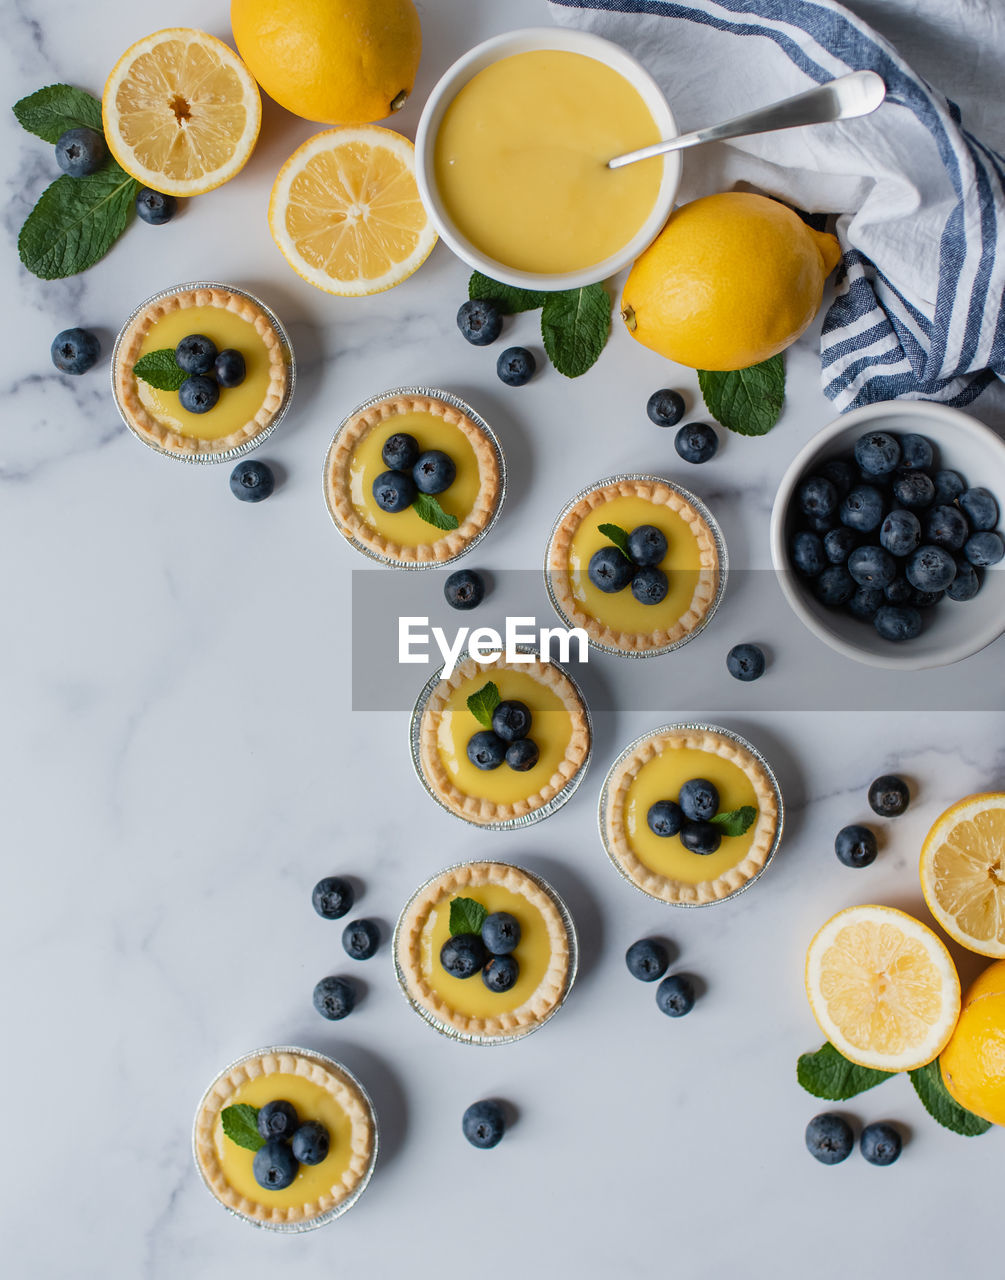 Overhead view of mini lemon tarts with blueberries on marble counter.